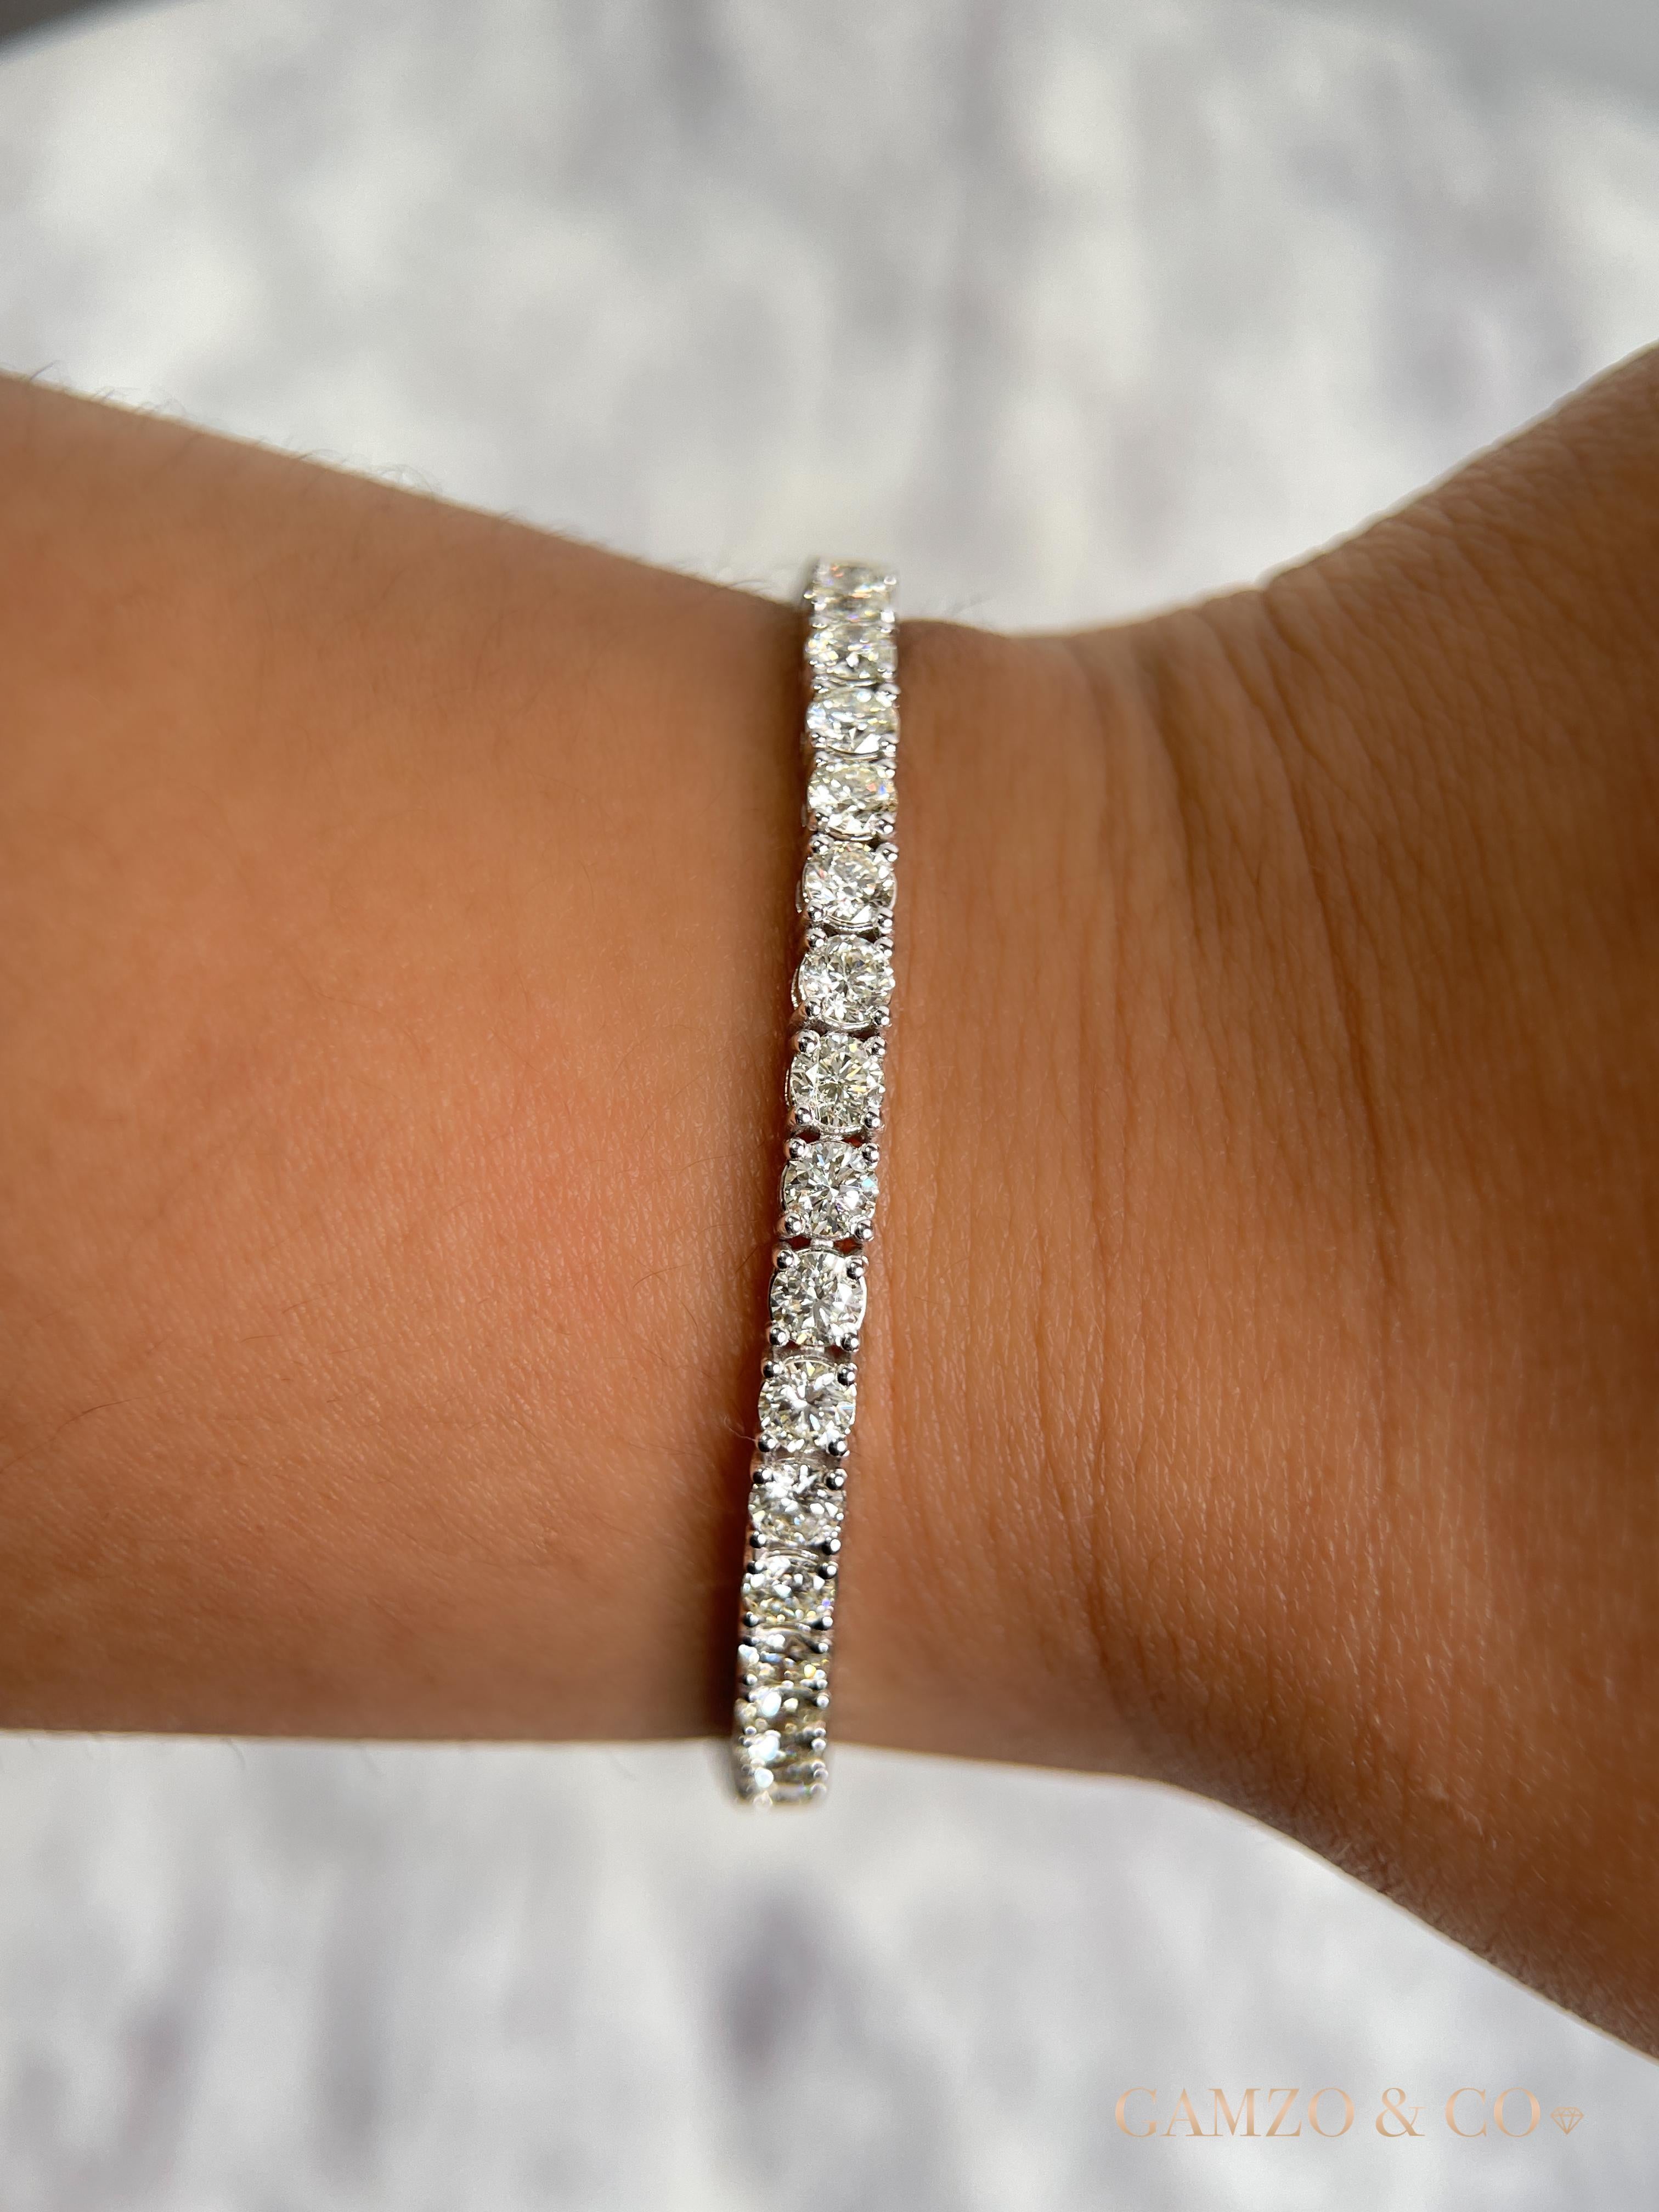 This diamond tennis bracelet features beautifully cut round diamonds set gorgeously in 14k gold.

Metal: 14k Gold
Diamond Cut: Round Natural Diamond 
Total Diamond Carats: 12ct
Diamond Clarity: VS
Diamond Color: F-G
Color: Yellow Gold
Bracelet